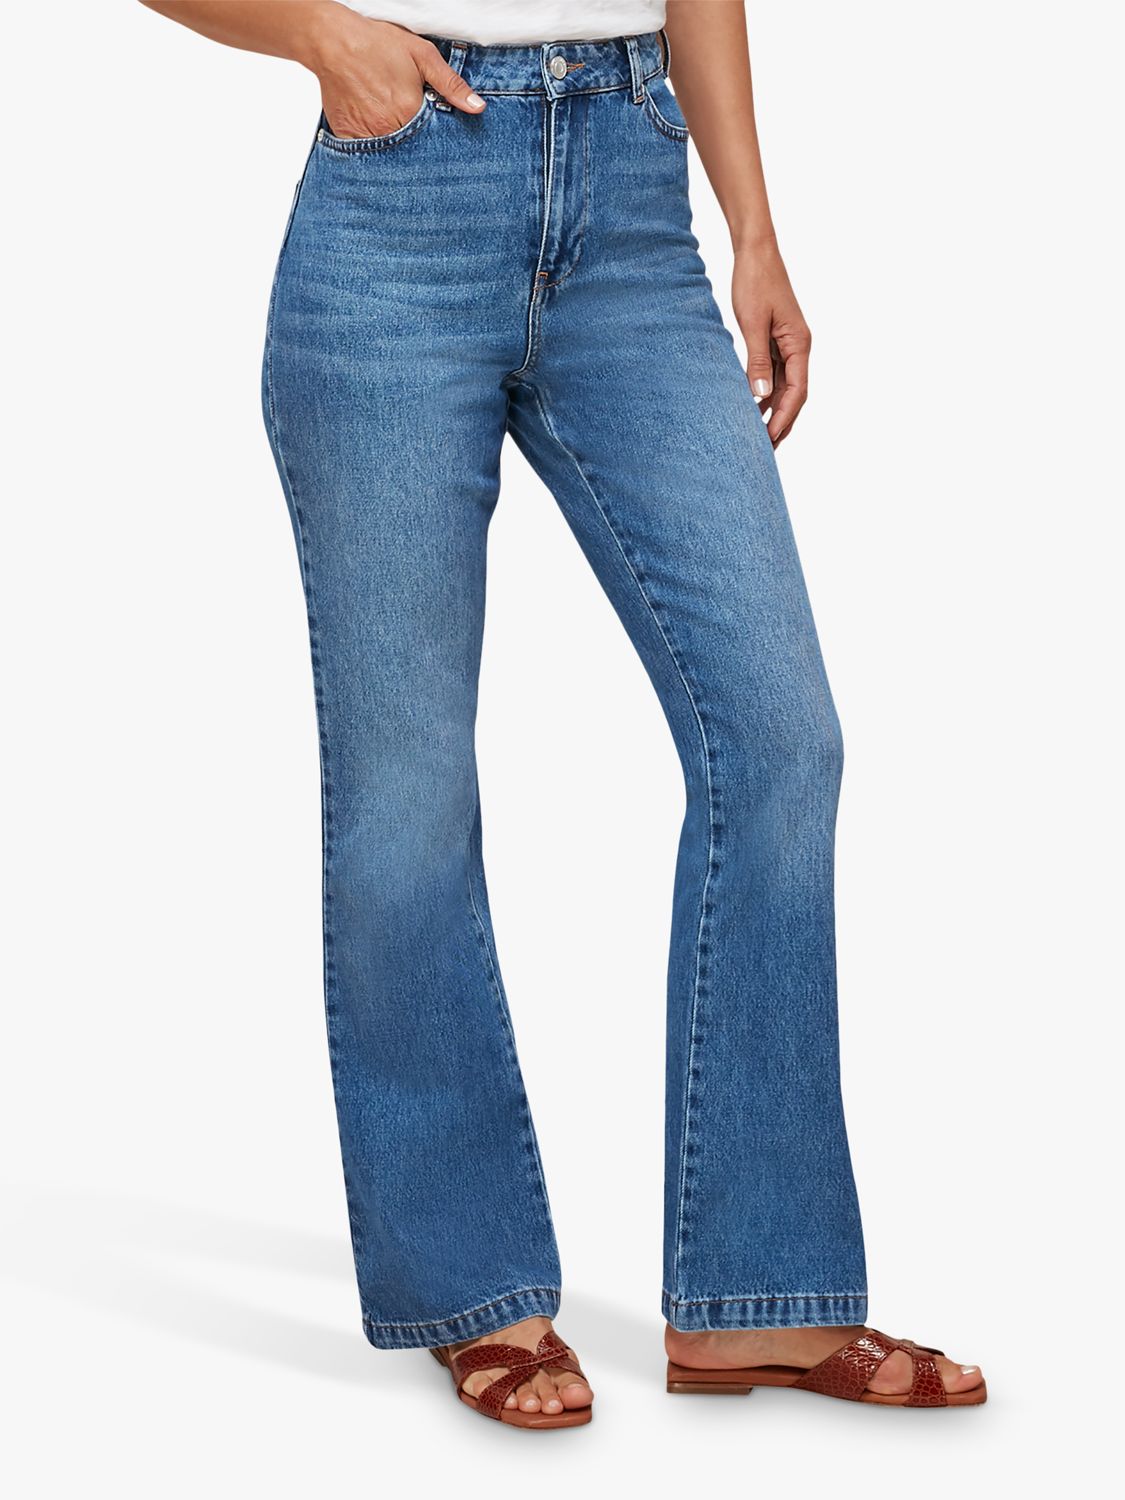 Whistles Authentic Flared Jeans, Denim, 27